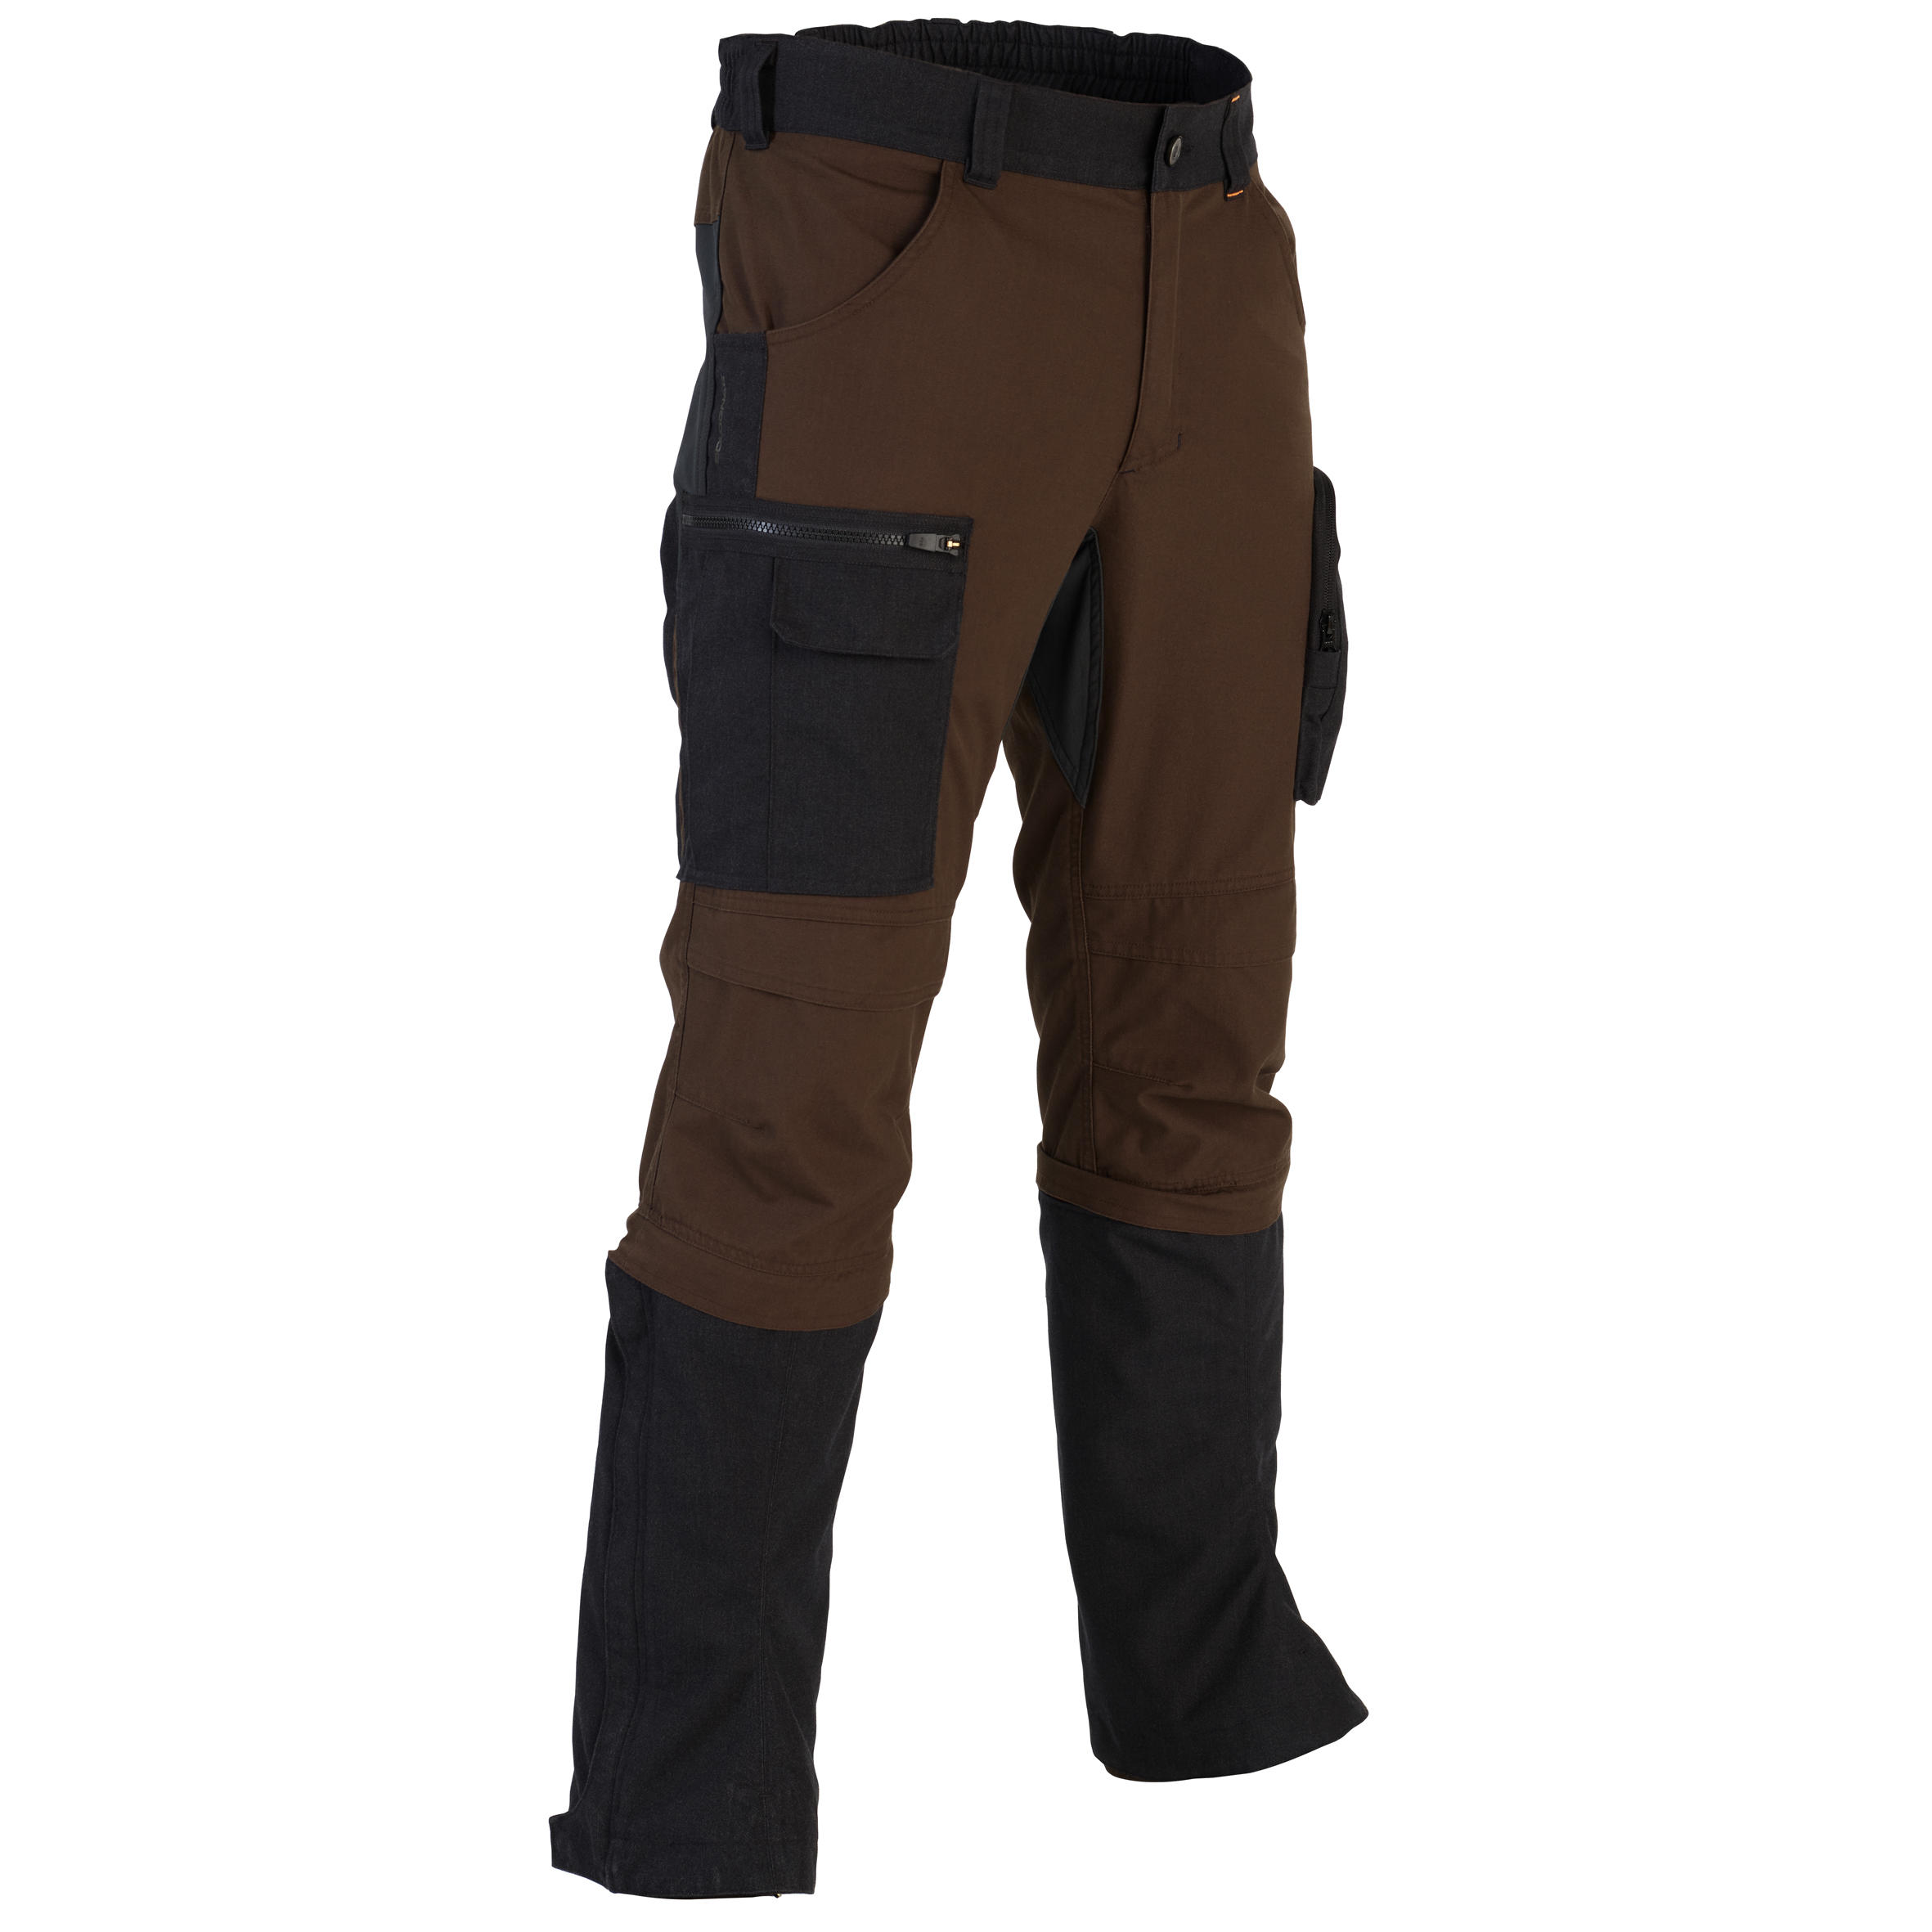 SOLOGNAC Men's Country Sport Resistant Breathable Trousers - Steppe 920 Brown Gaiters